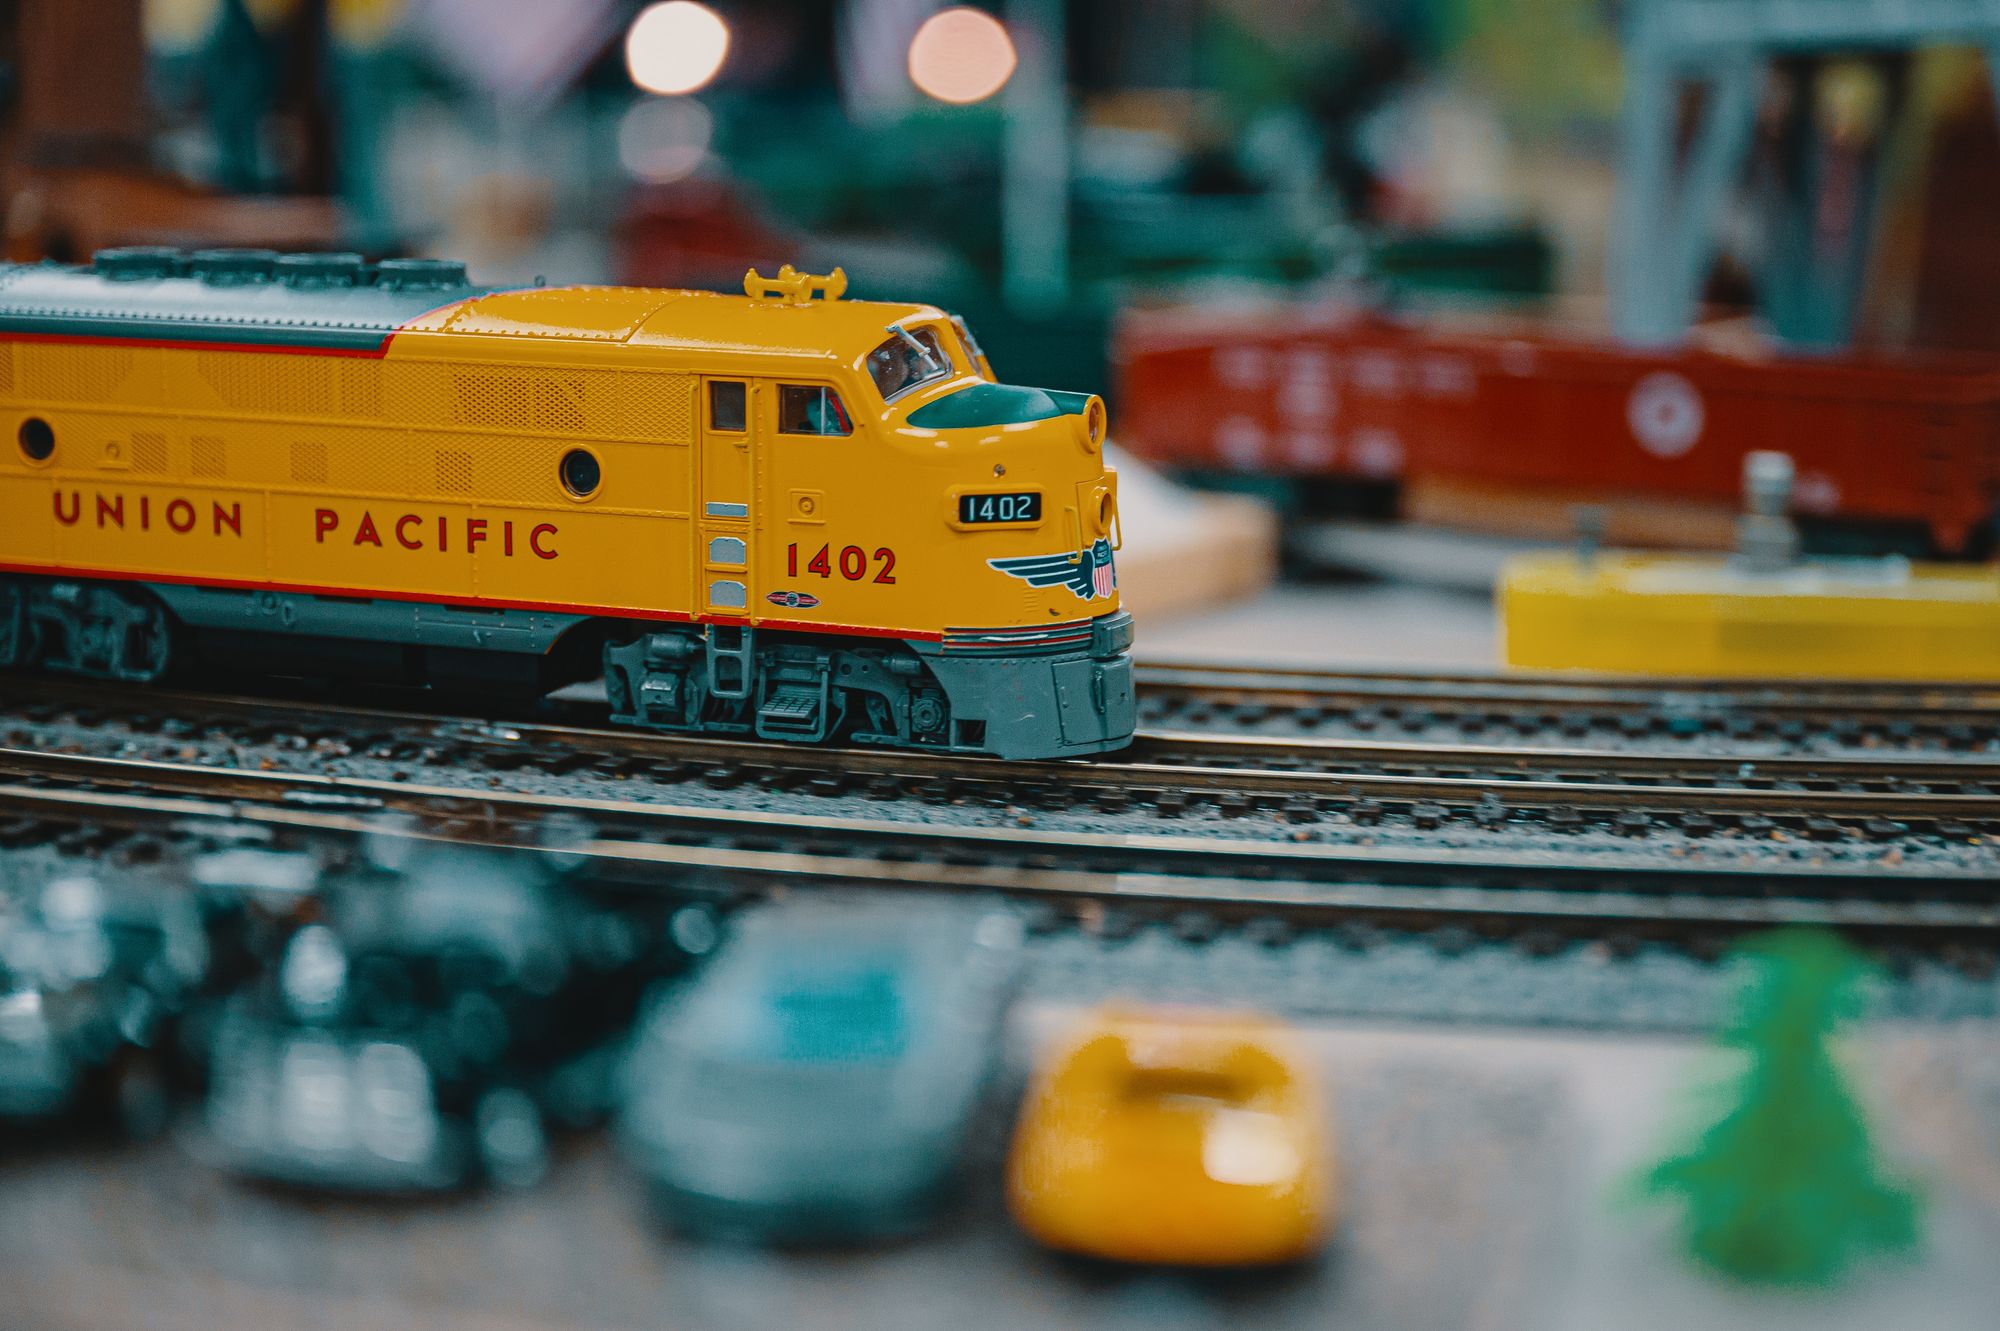 Union Pacific model train in a hobby store